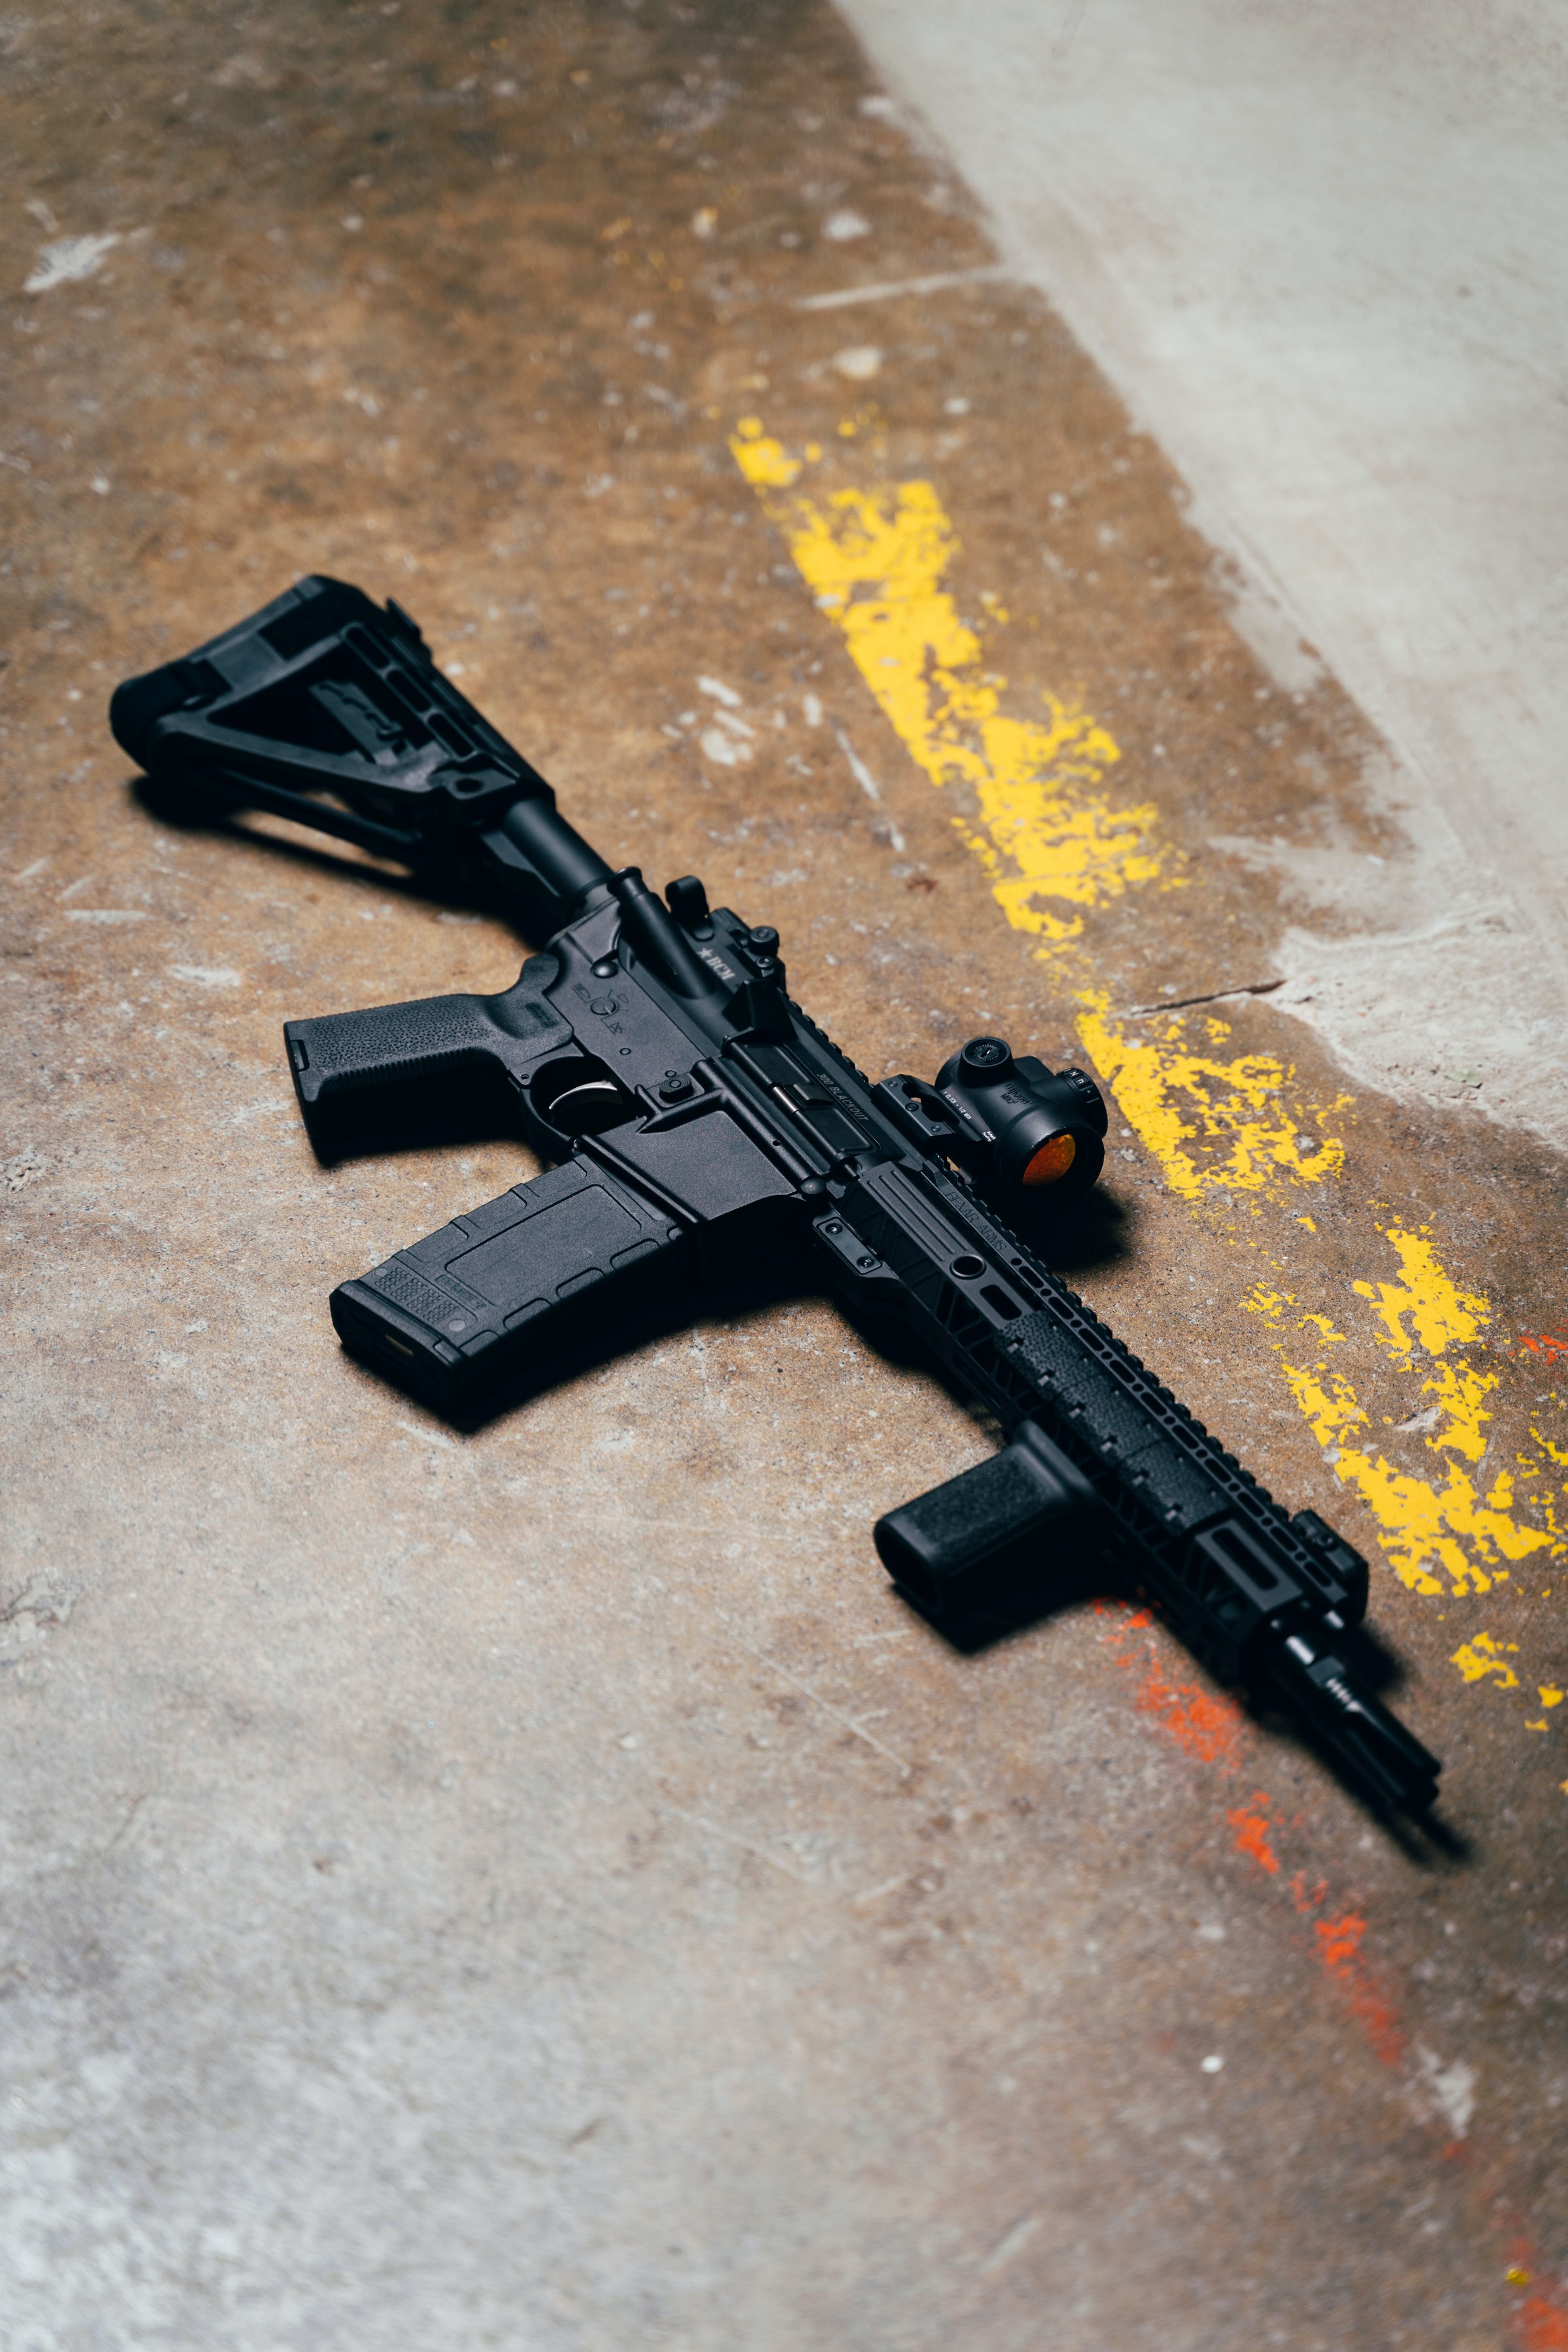 Black Rifle Depot: Where Passion for AR-15s Meets Quality Parts